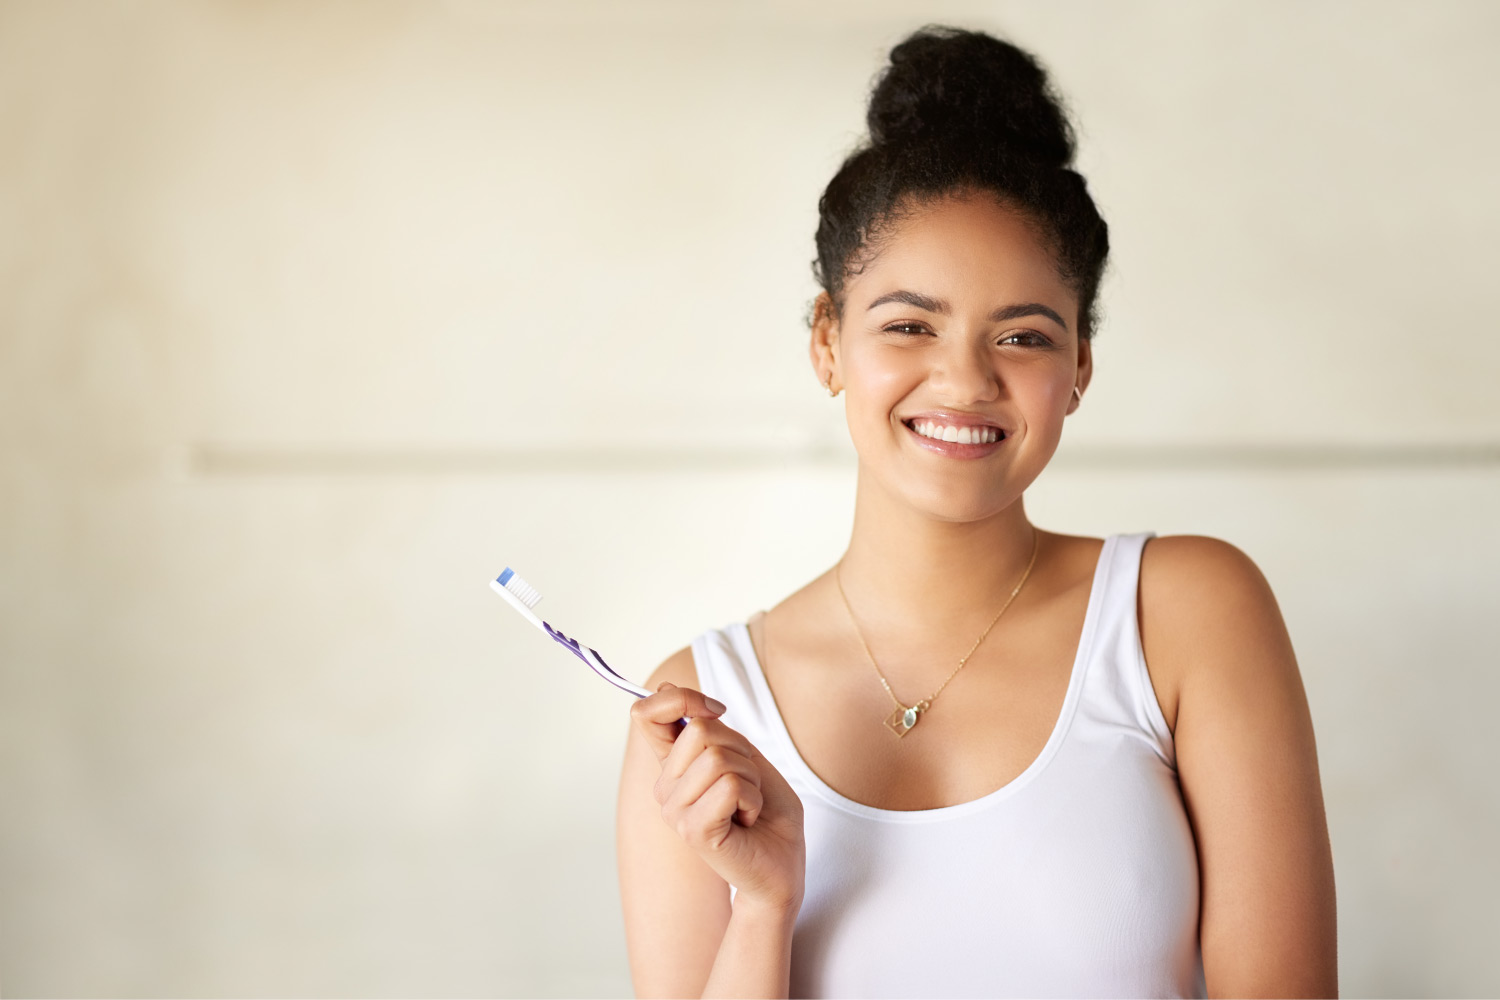 Brunette girl in a white tank top smiles while holding her toothbrush to care for her oral health